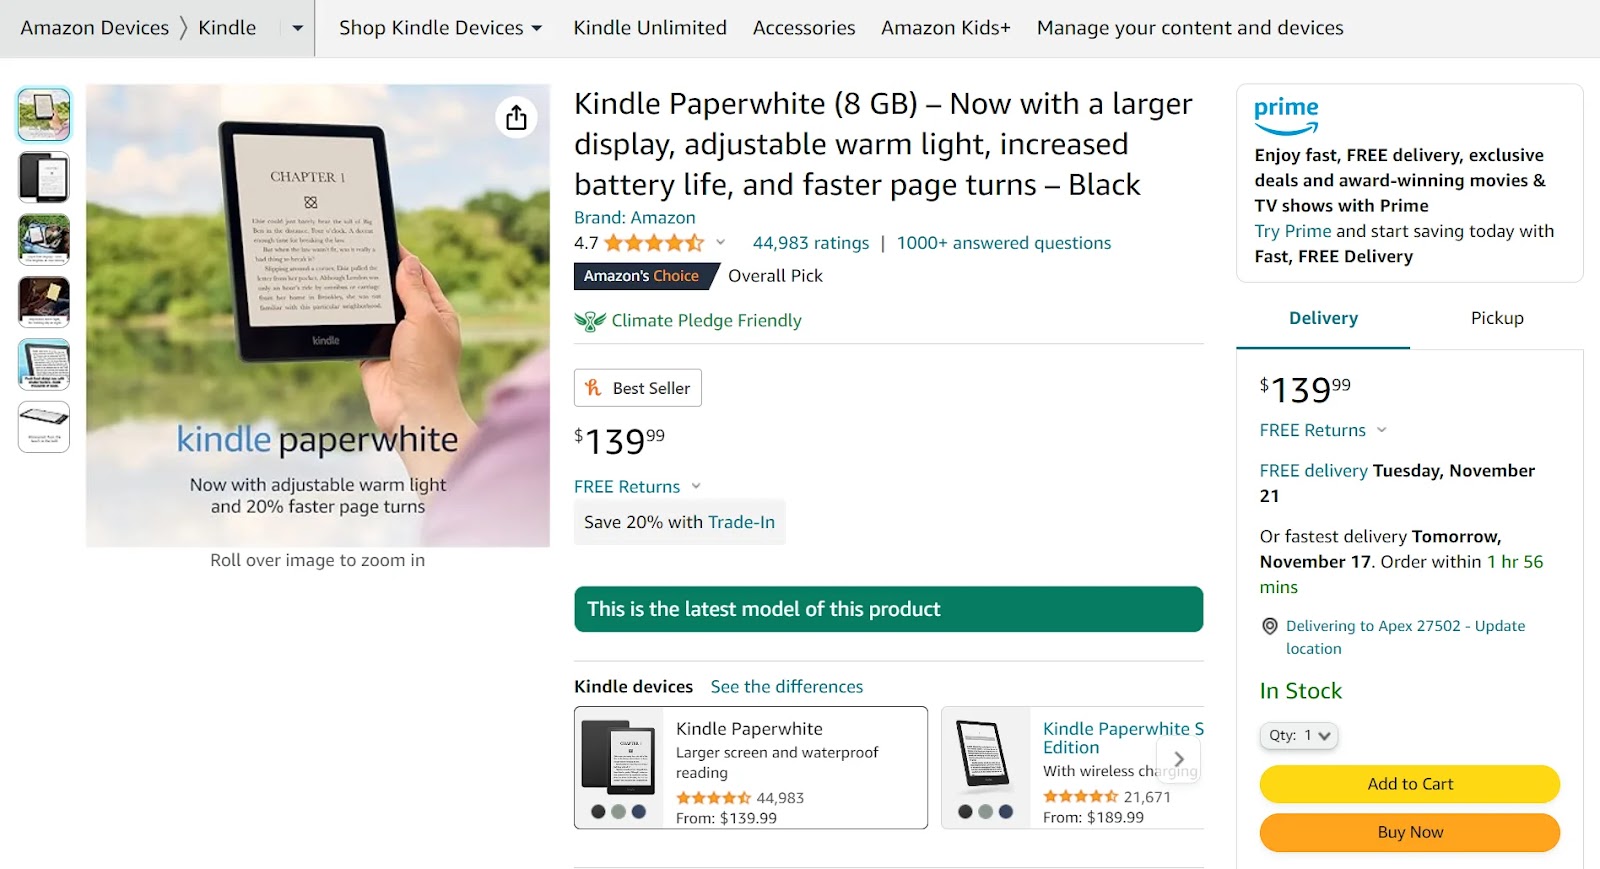 A page for the Amazon Kindle Paperwhite